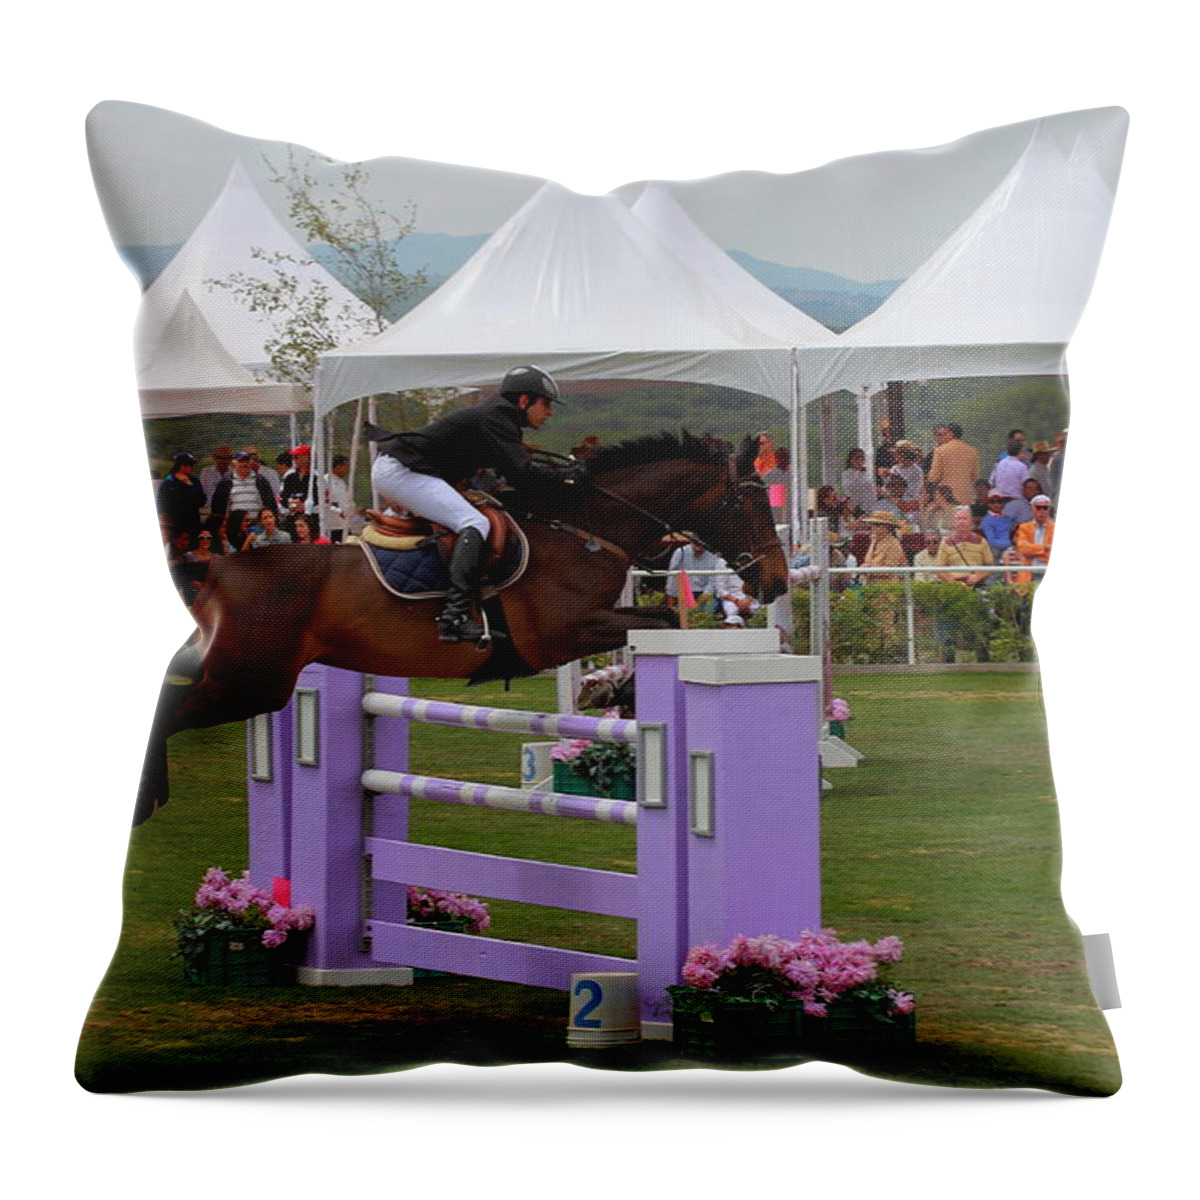 Equestrian Throw Pillow featuring the photograph Equestrian Events, San Miguel de Allende by Robert McKinstry